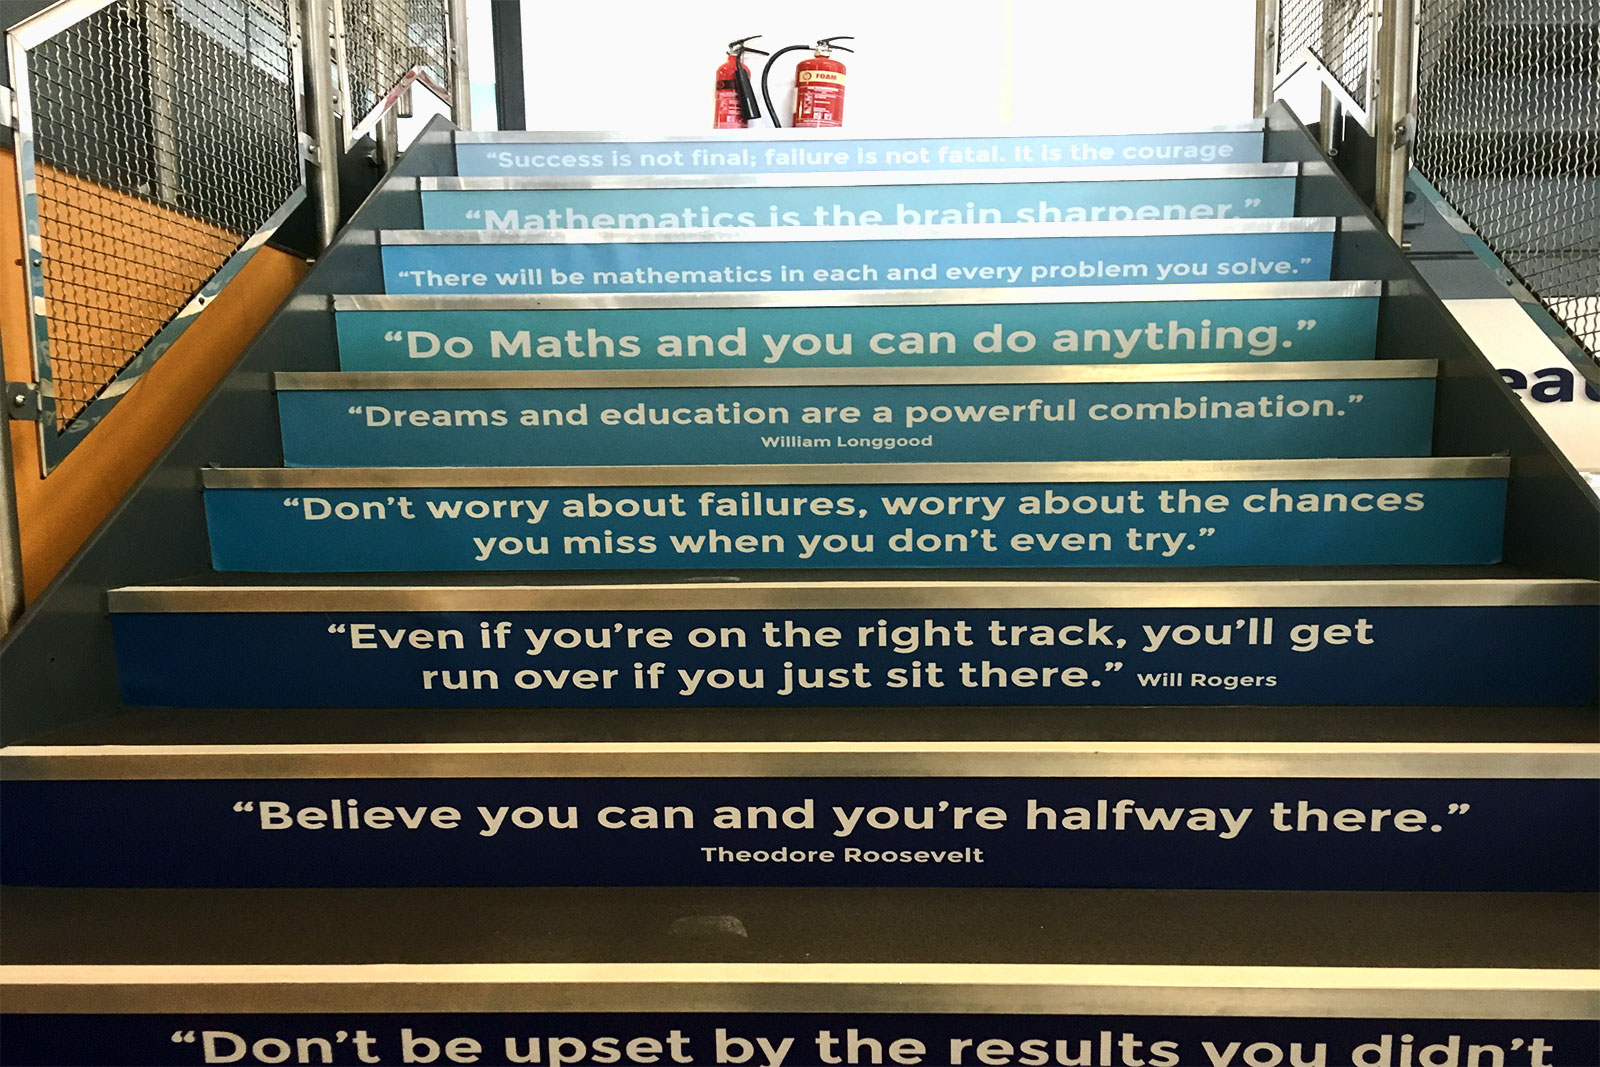 Schools signs � making your school stand-out with professional signage for schools 